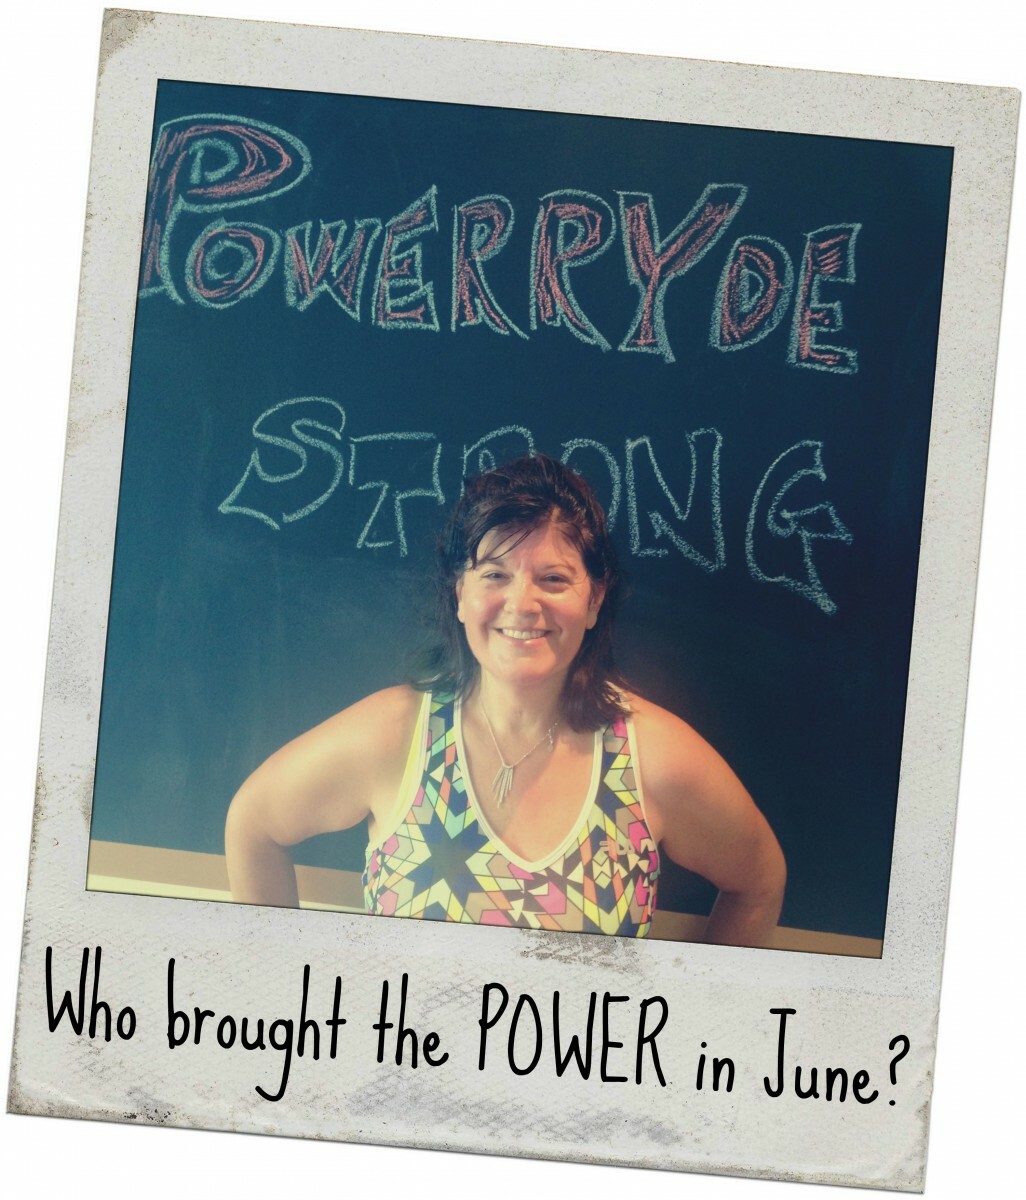 Polaroid style picture of Cindy Reichman with 'Who Brought the POWER in 'June'?